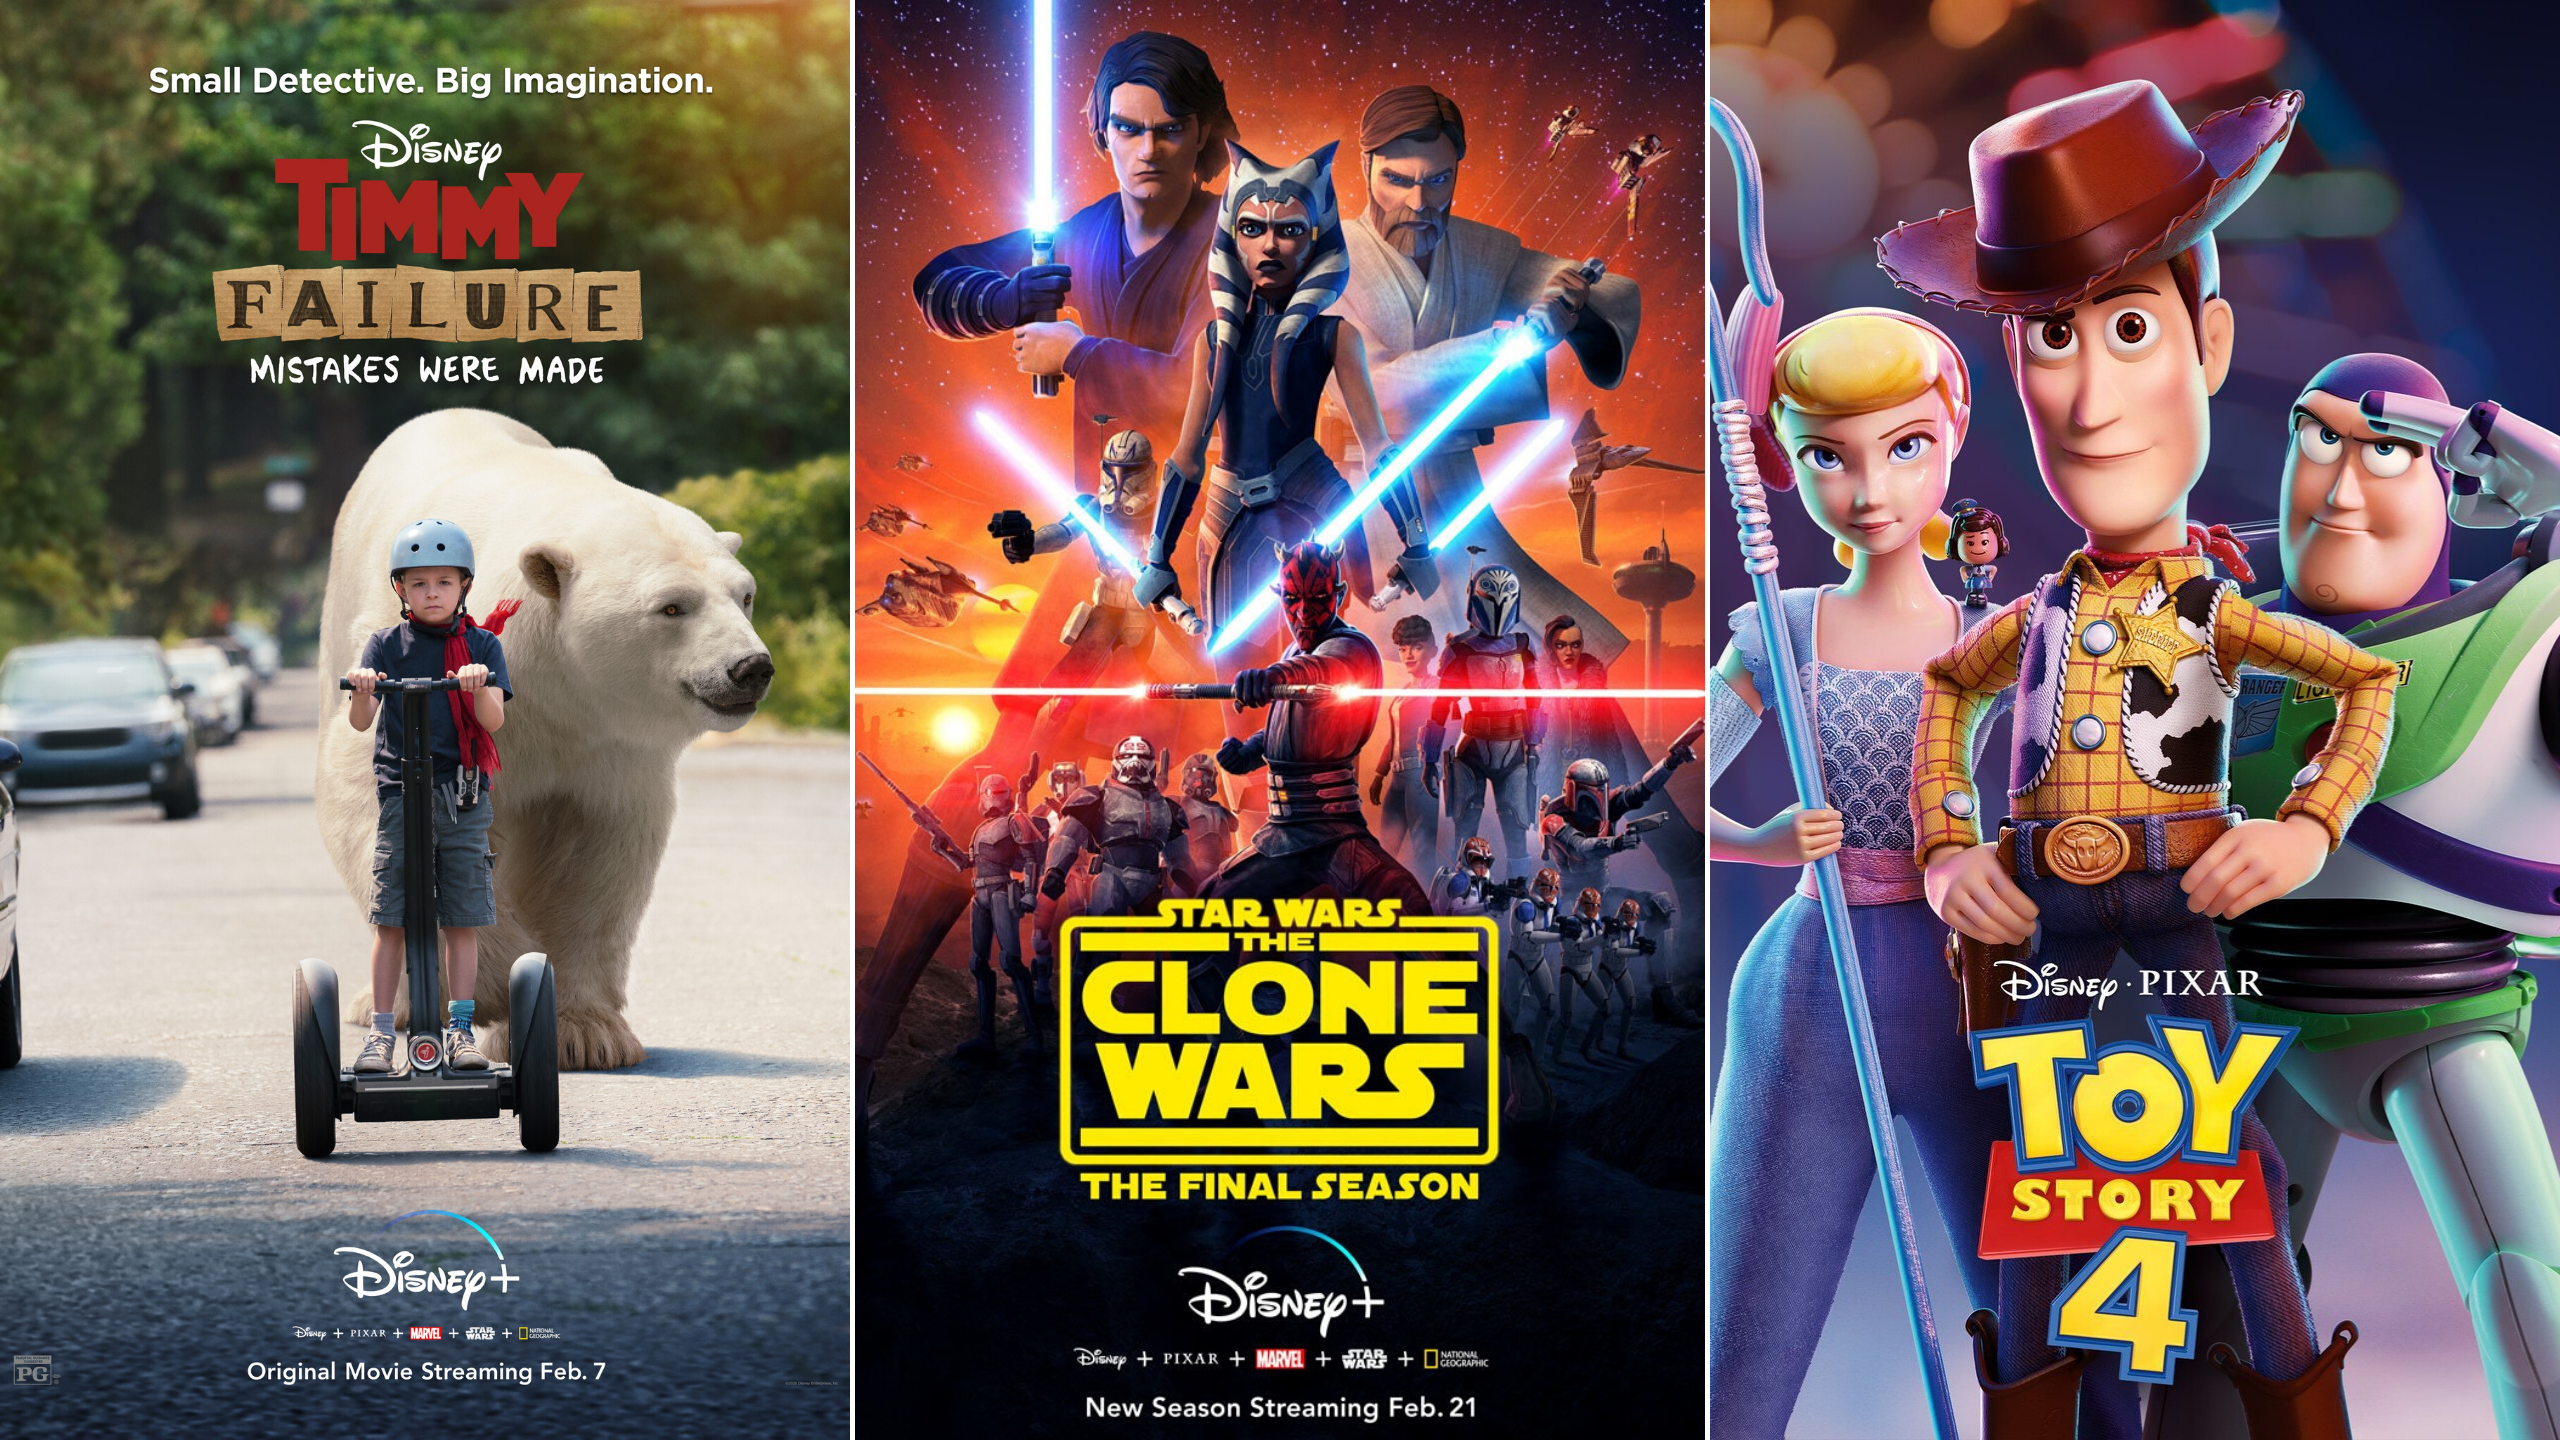 Descendants 3, Toy Story 4, Star Wars: The Clone Wars, Timmy Failure and everything else coming to Disney Plus in February 2020.